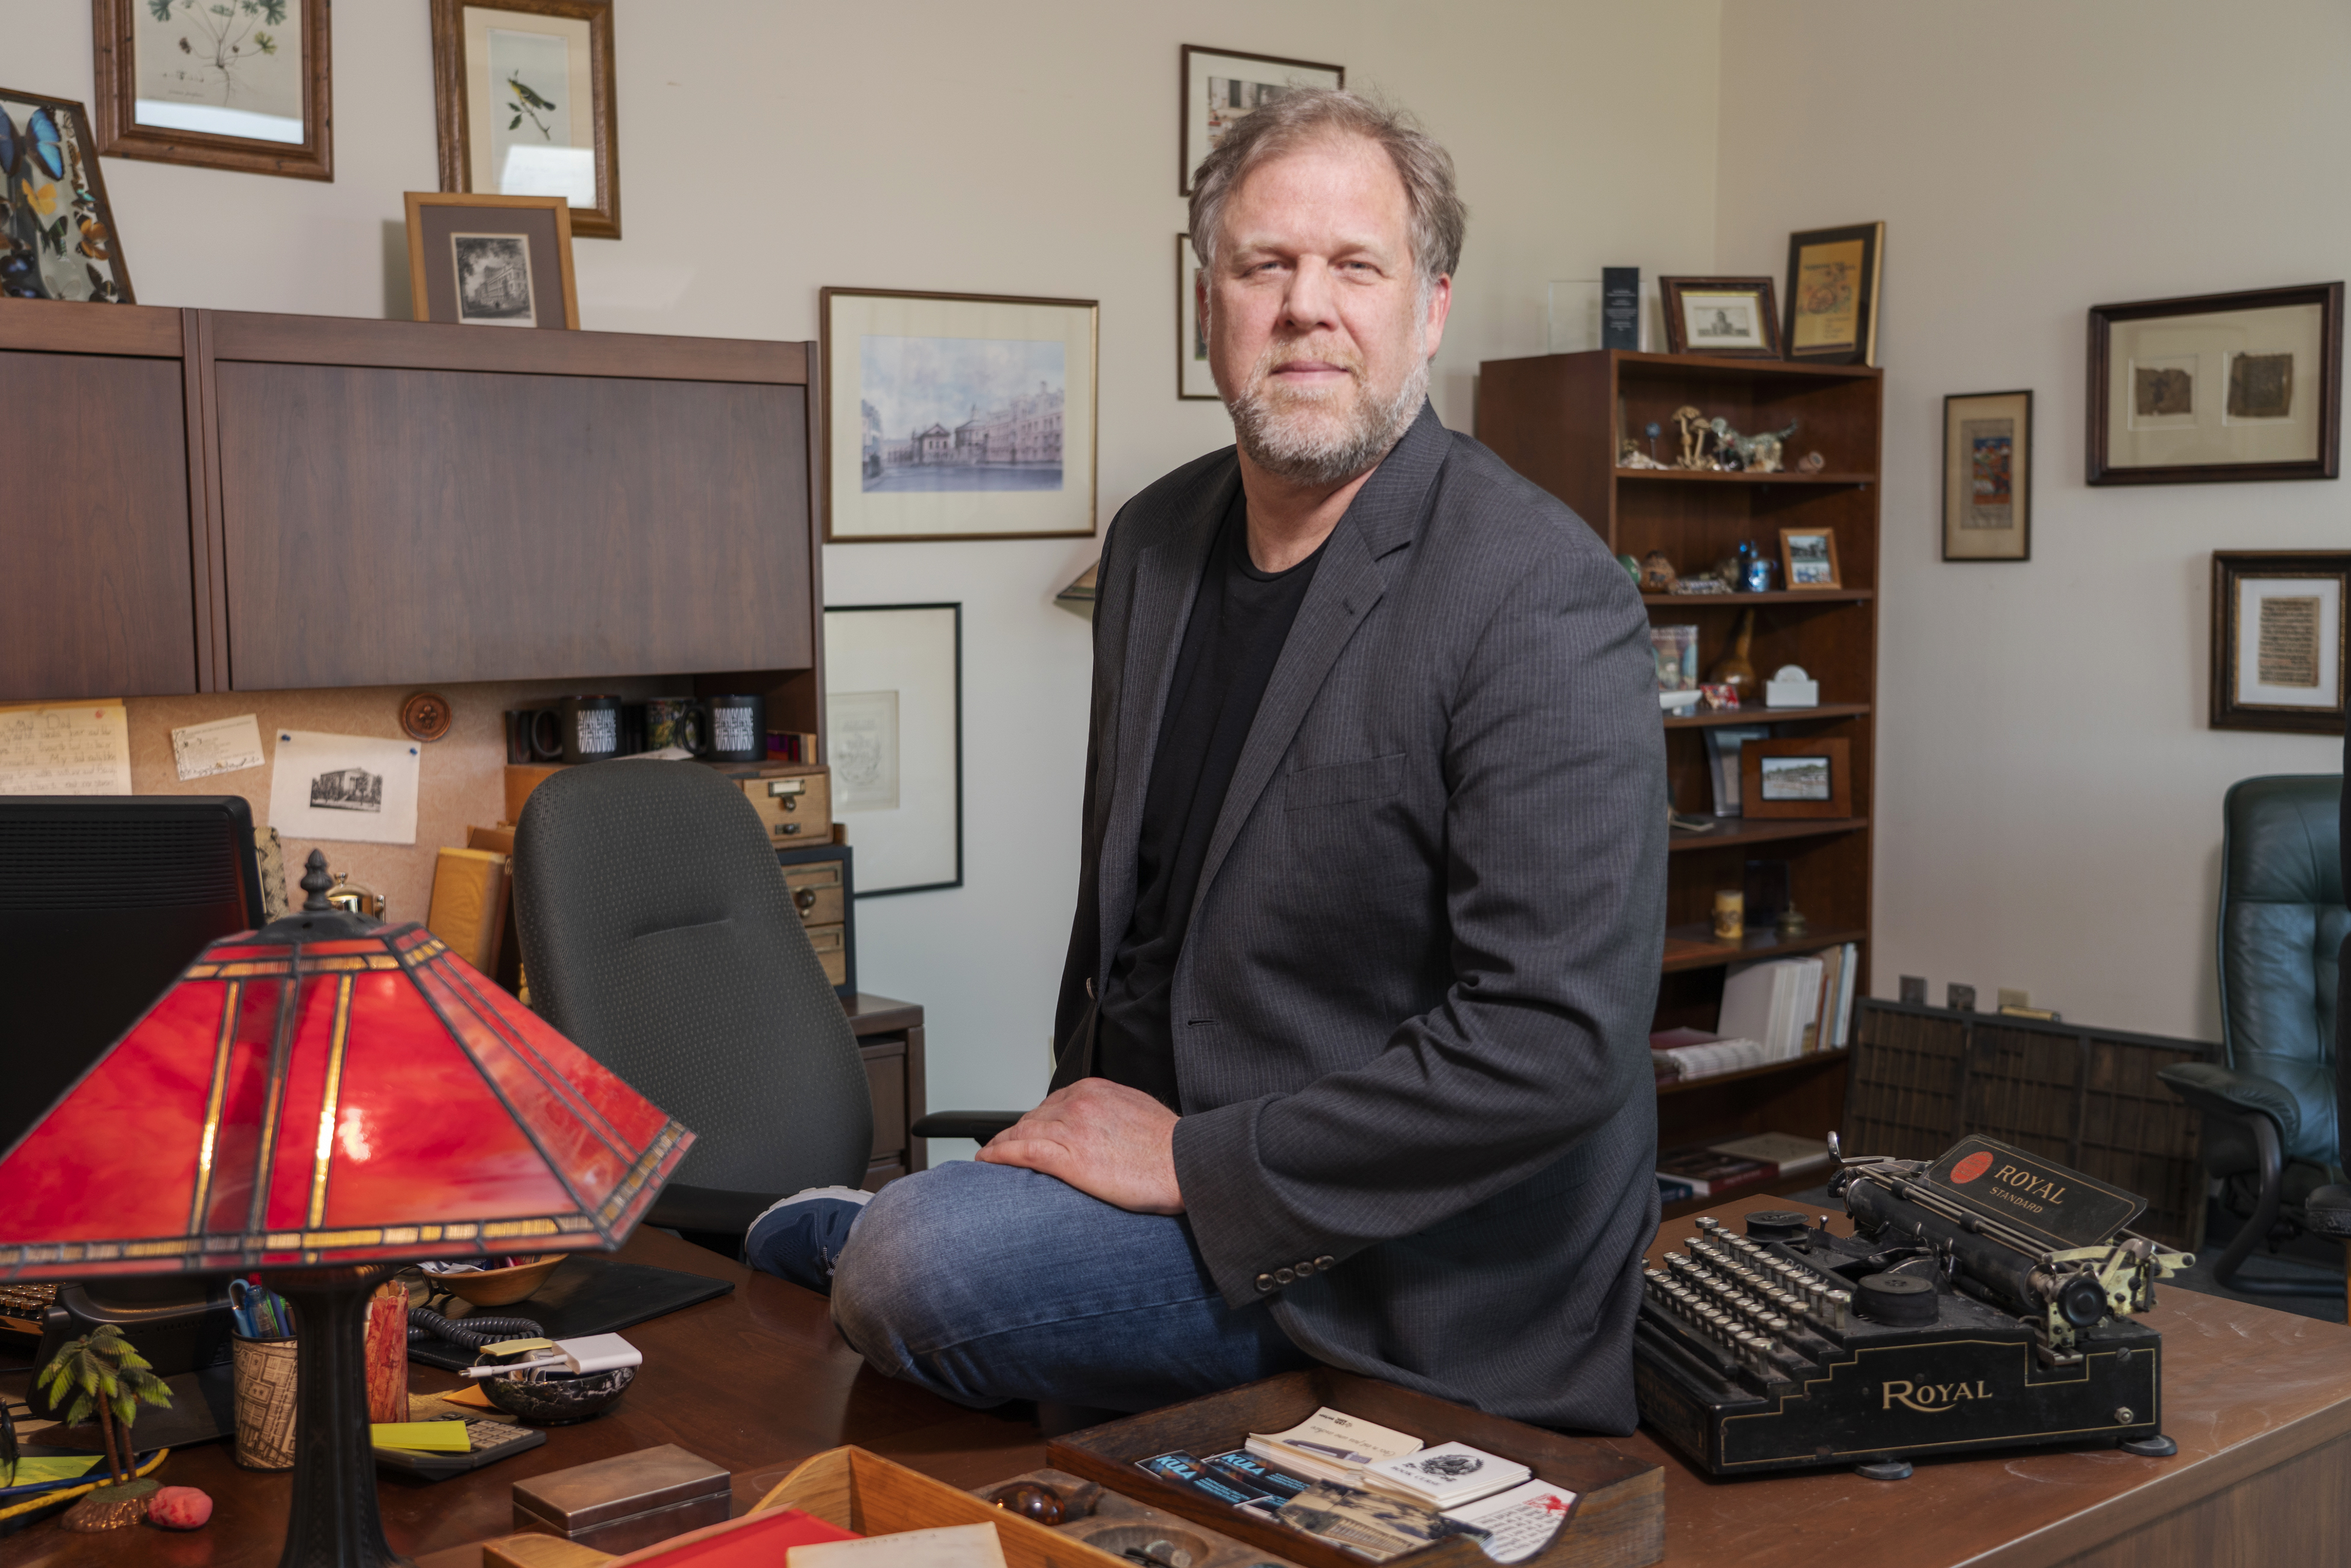 Jonathan Bengtson sitting on his desk next to a vintage typewriter in his office.